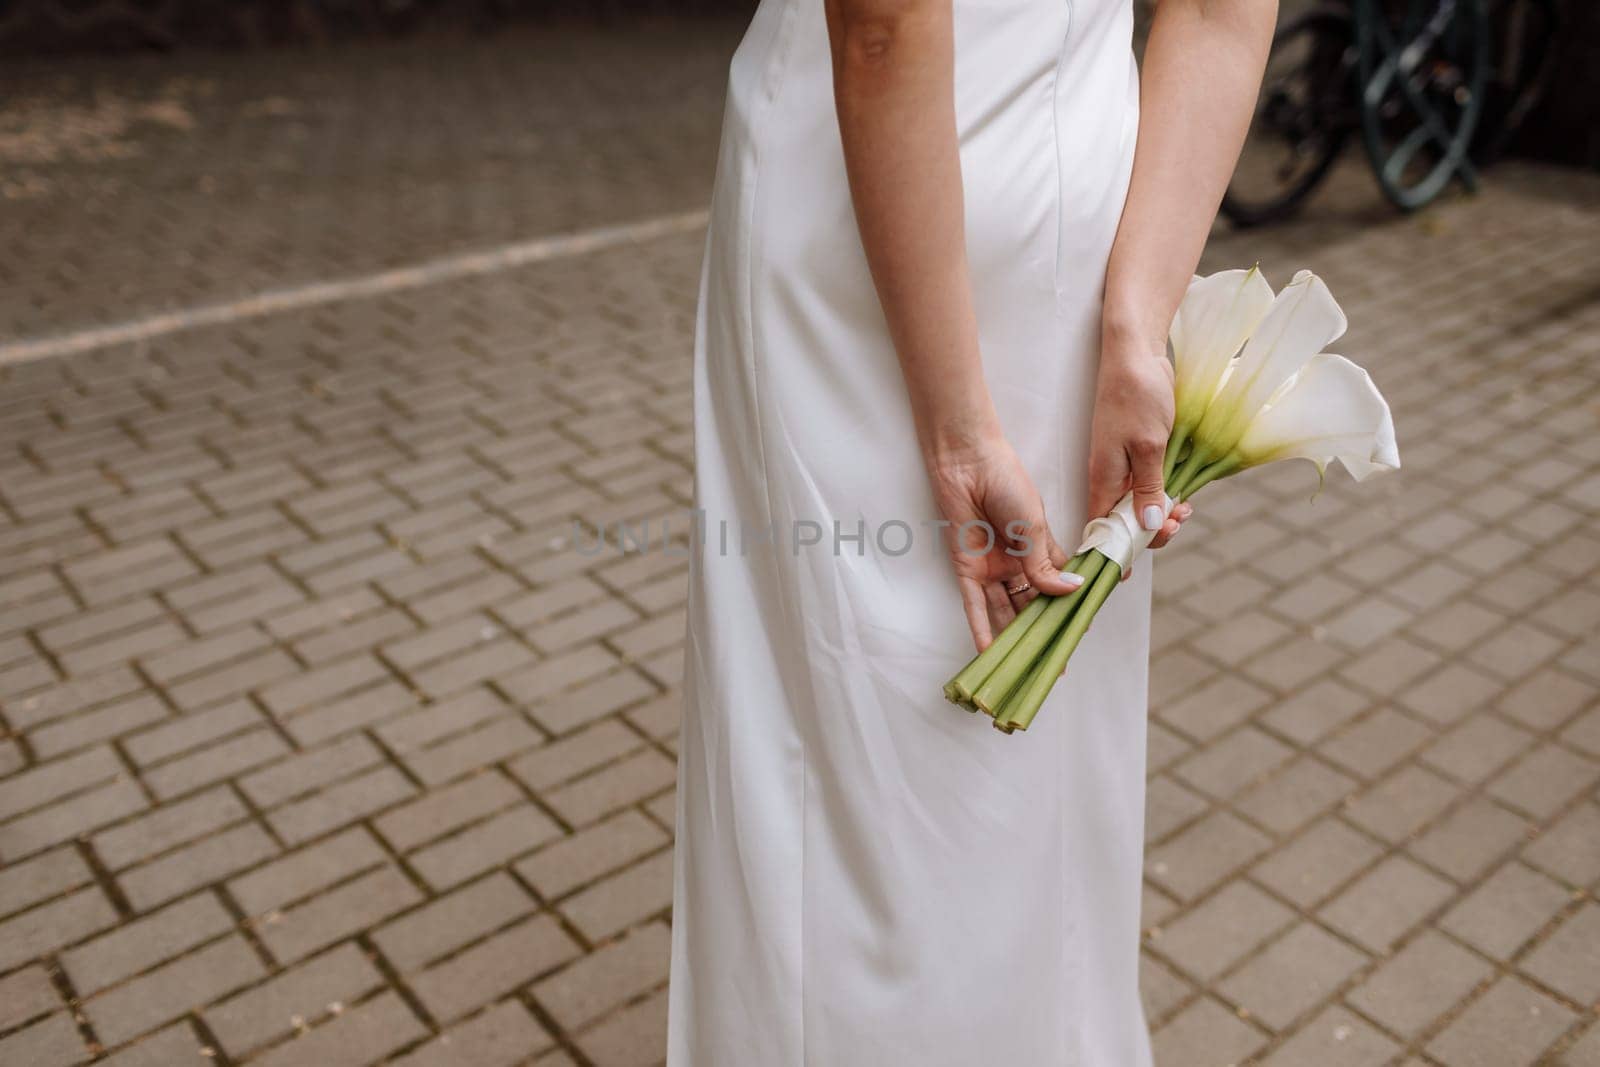 Bridal bouquet. Wedding. The slim woman in a white dress holds a beautiful bouquet of white flowers outdoors.